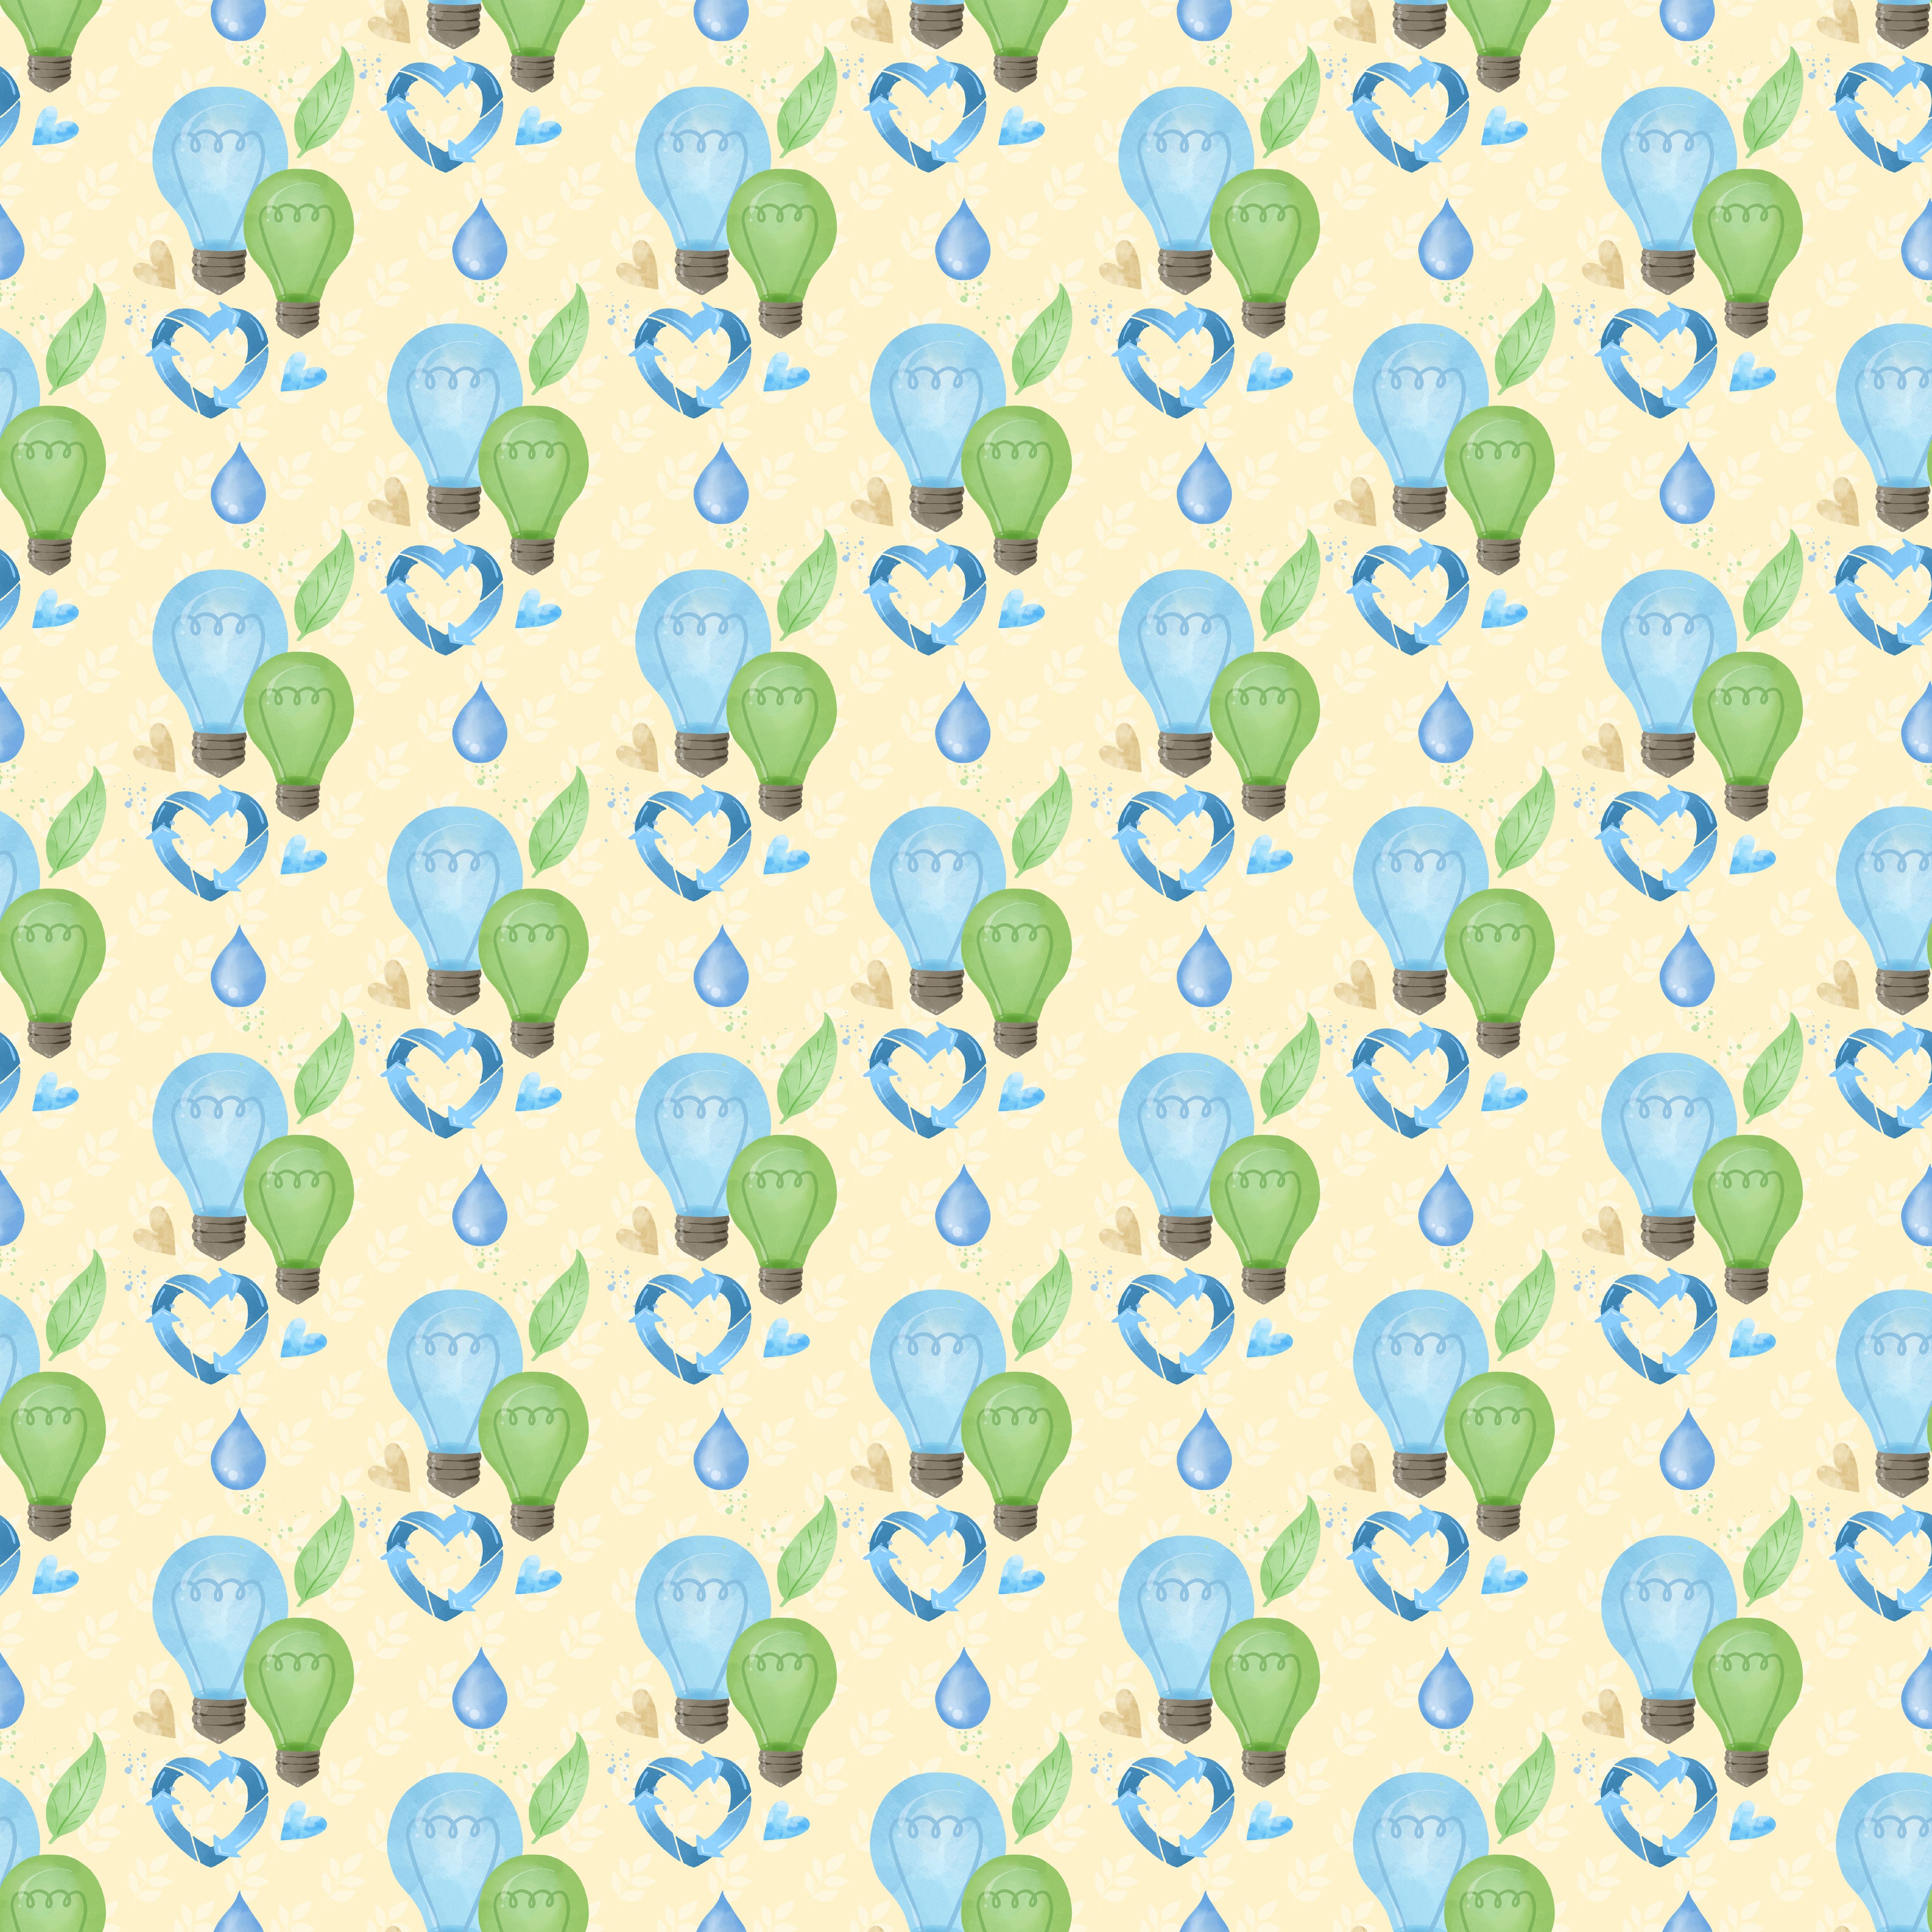 Earth Day Collection Earth Day Love 12 x 12 Double-Sided Scrapbook Paper by SSC Designs